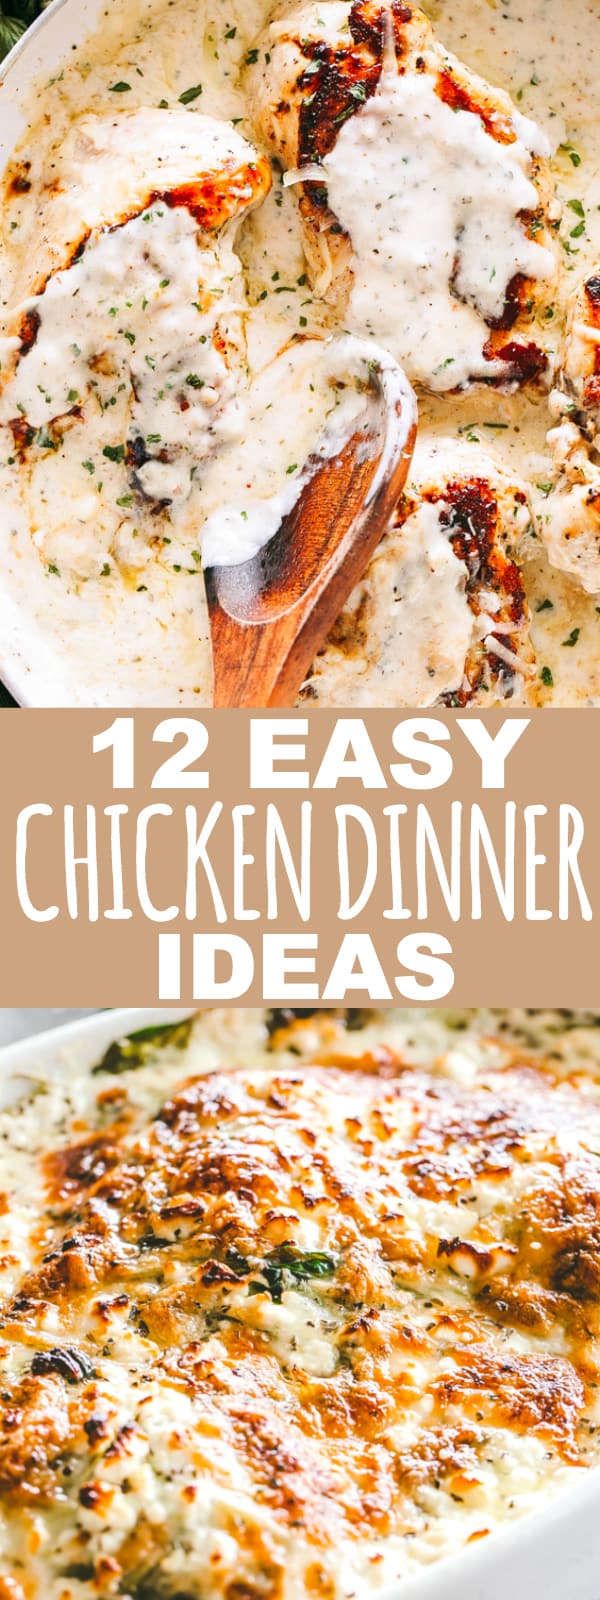 12 Easy Chicken Dinner Ideas Your Family Will Love - Easy, fresh, quick, and delicious chicken dinners.